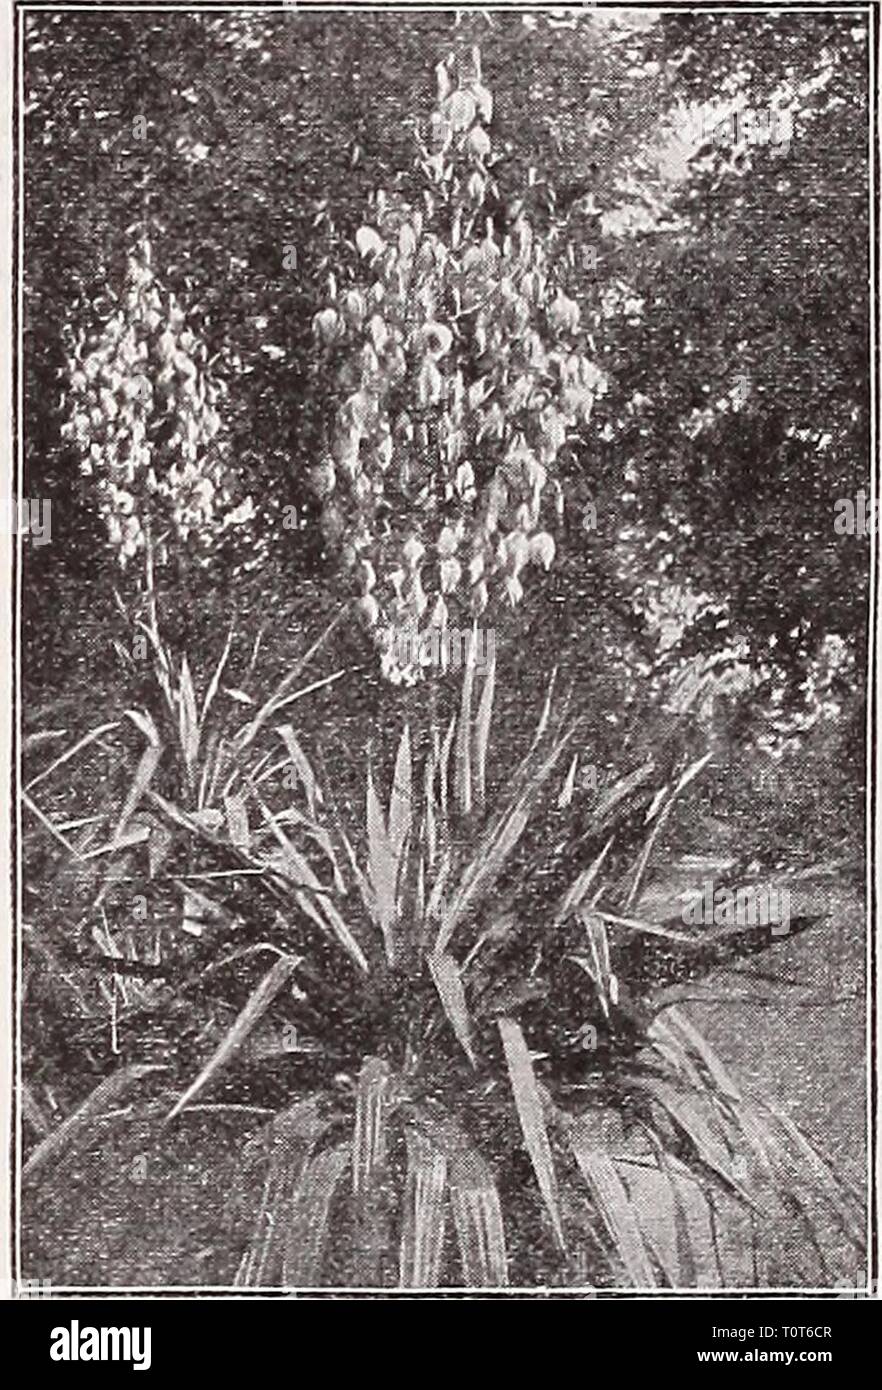 Dreer's autumn catalogue 1932 (1932) Dreer's autumn catalogue 1932  dreersautumncata1932henr Year: 1932  ^RELIABLE FLOWER SEEDS/ Tunica PER PKX. 4335 Saxifraga. A neat, tufted hardy, perennial plant, growing but a few inches high, and bearing throughout the entire season numerous elegant pink flowers. Will thrive anywhere, but is especially adapted for the rock garden or the margin of the hardy border.  oz., 40 cts $0 10 Tritoma Red-Hot Poker, Flame Flower, or Torch Lily 4330 Hybrida. The introduction of new, continuous flowering Tritomas has given them a prominent place among hardy bedding p Stock Photo